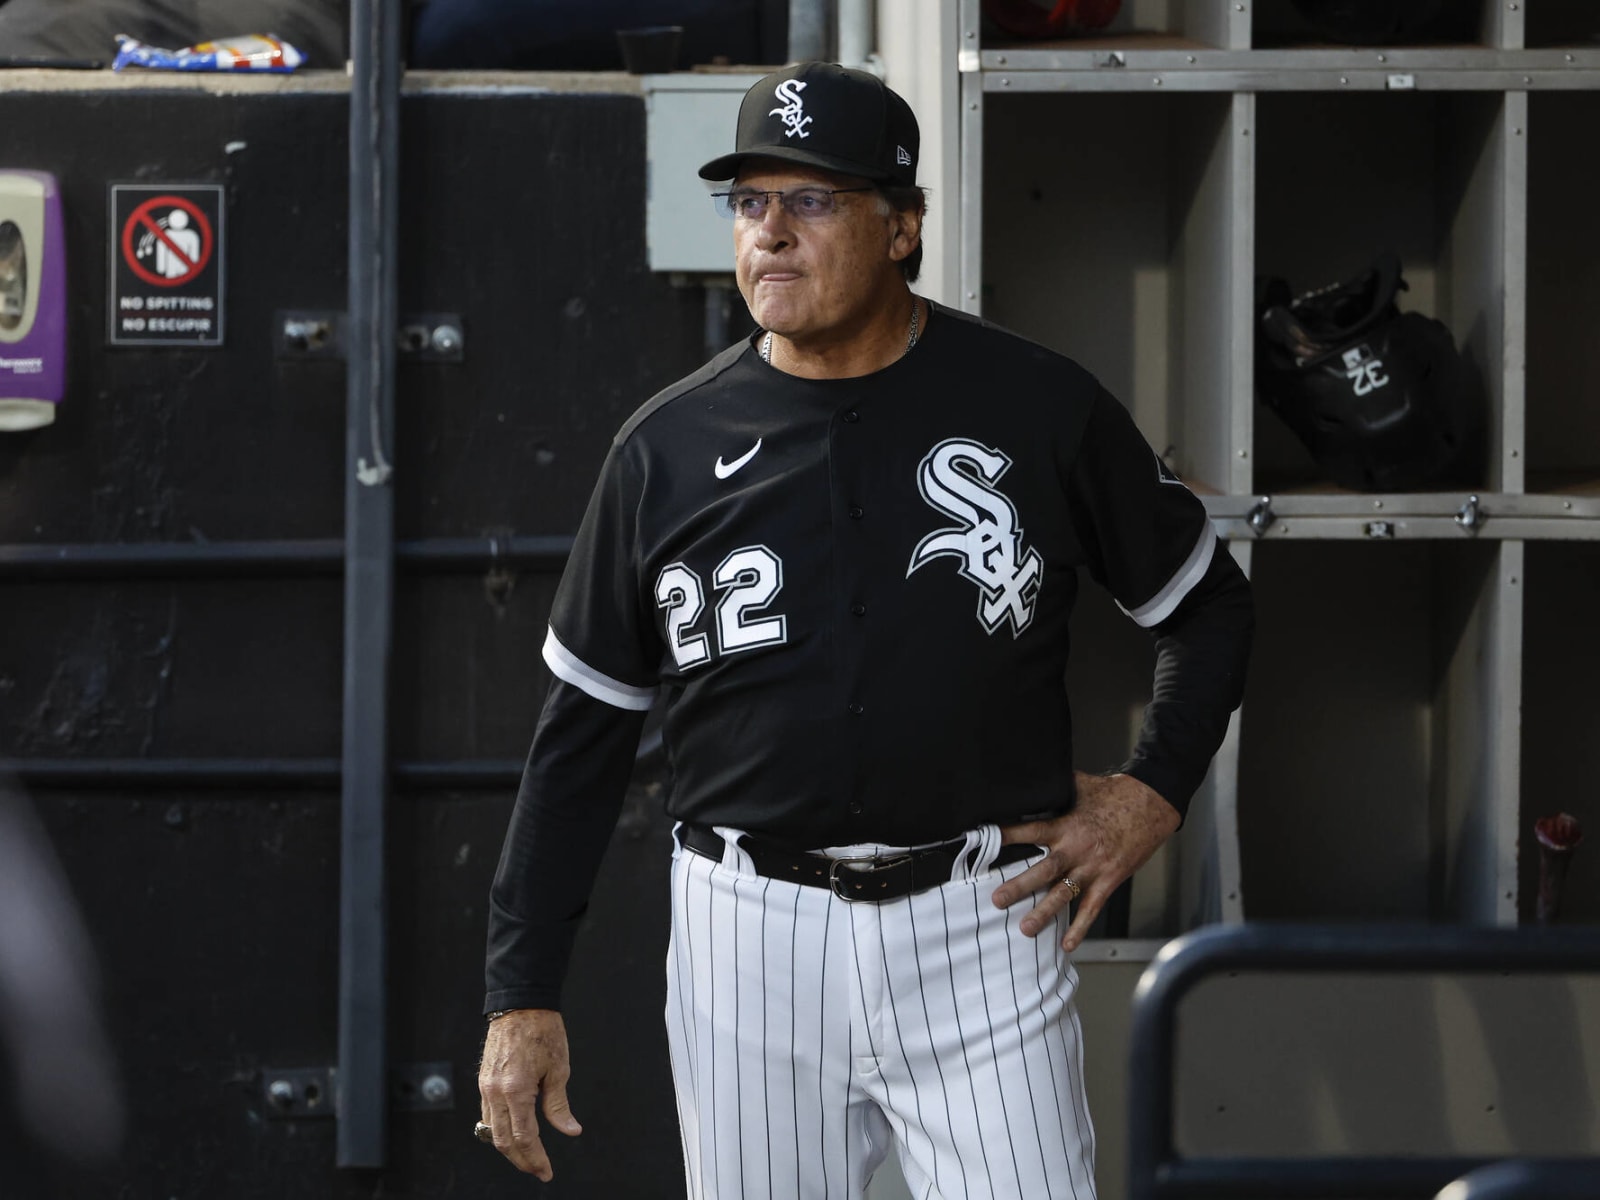 White Sox's Tony La Russa Undergoes Heart Tests, Out Indefinitely: Report